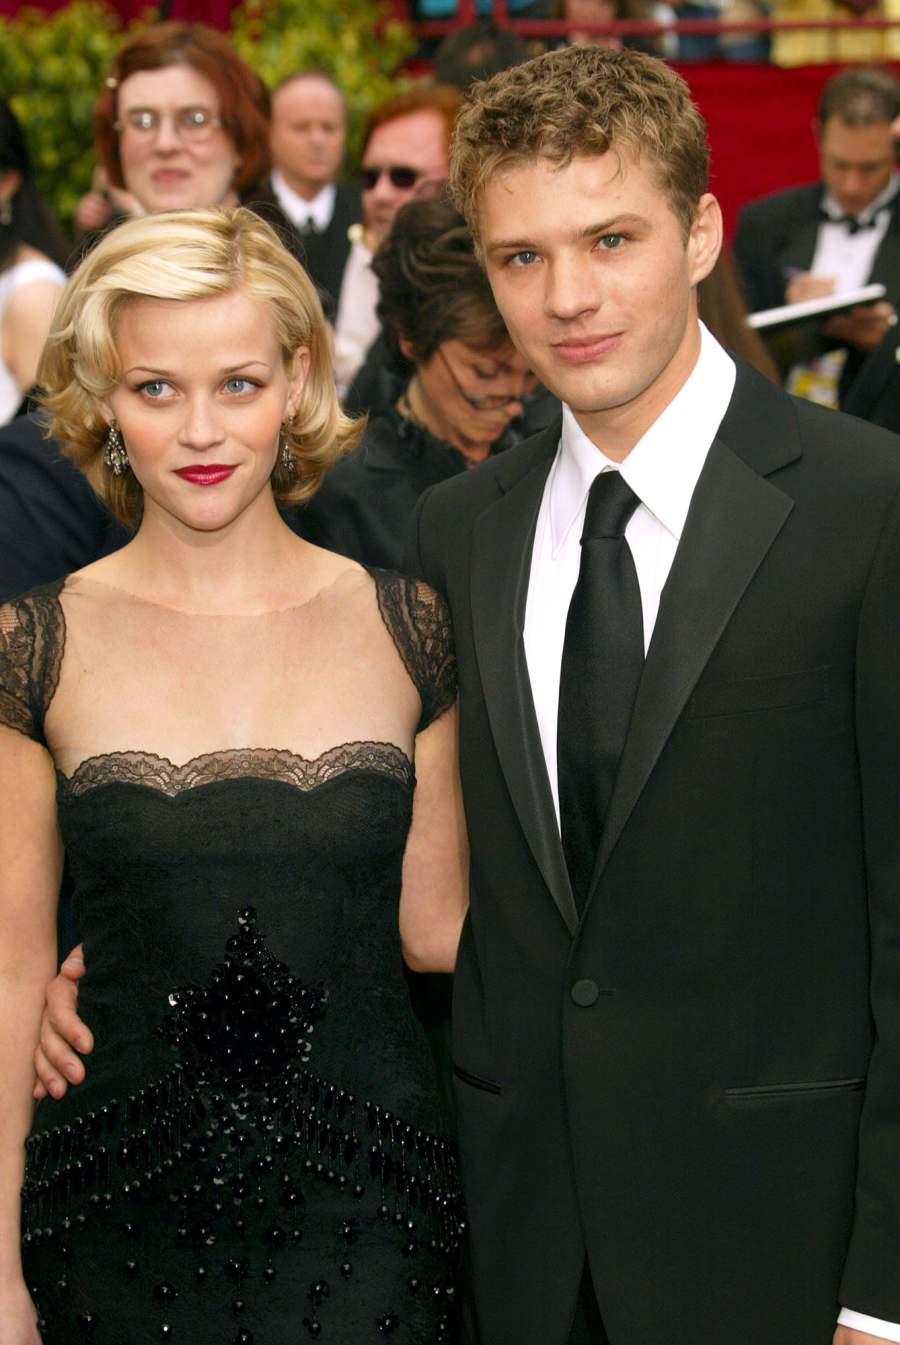 2002 Oscars Comment Reese Witherspoon and Ryan Phillippe Ups and Downs